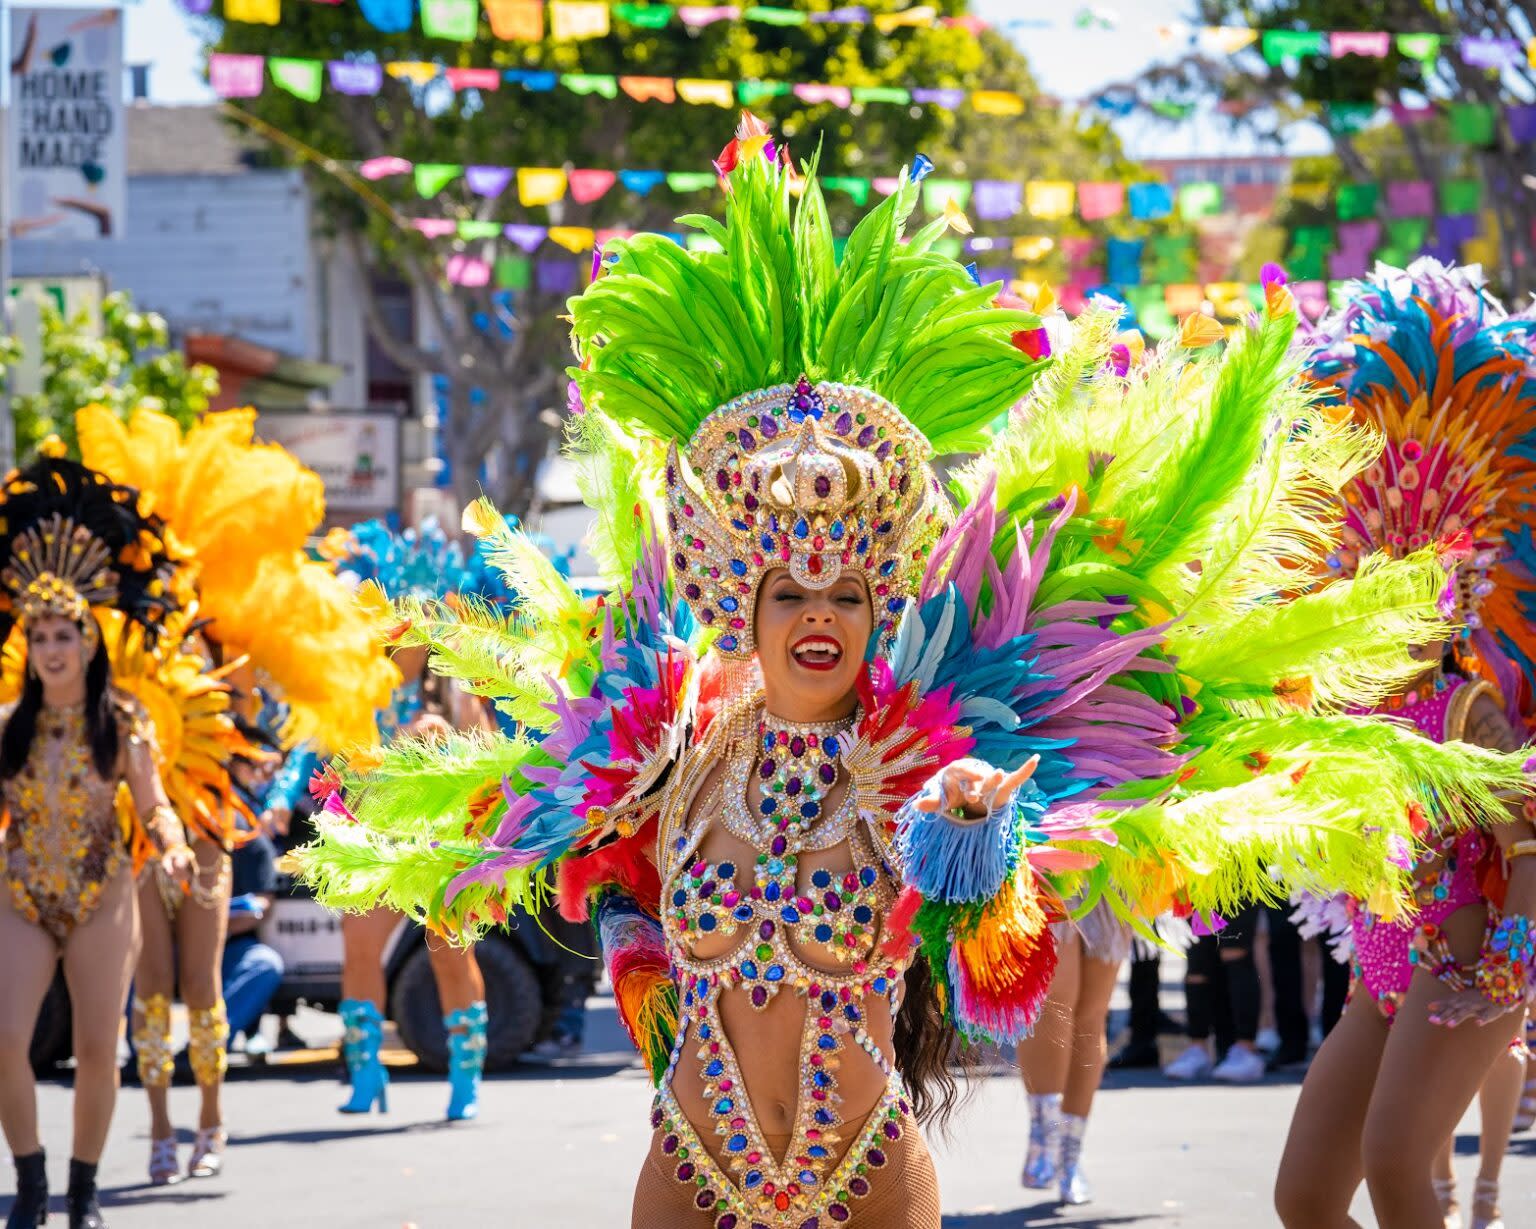 This weekend: The Carnaval Festival in Mission District